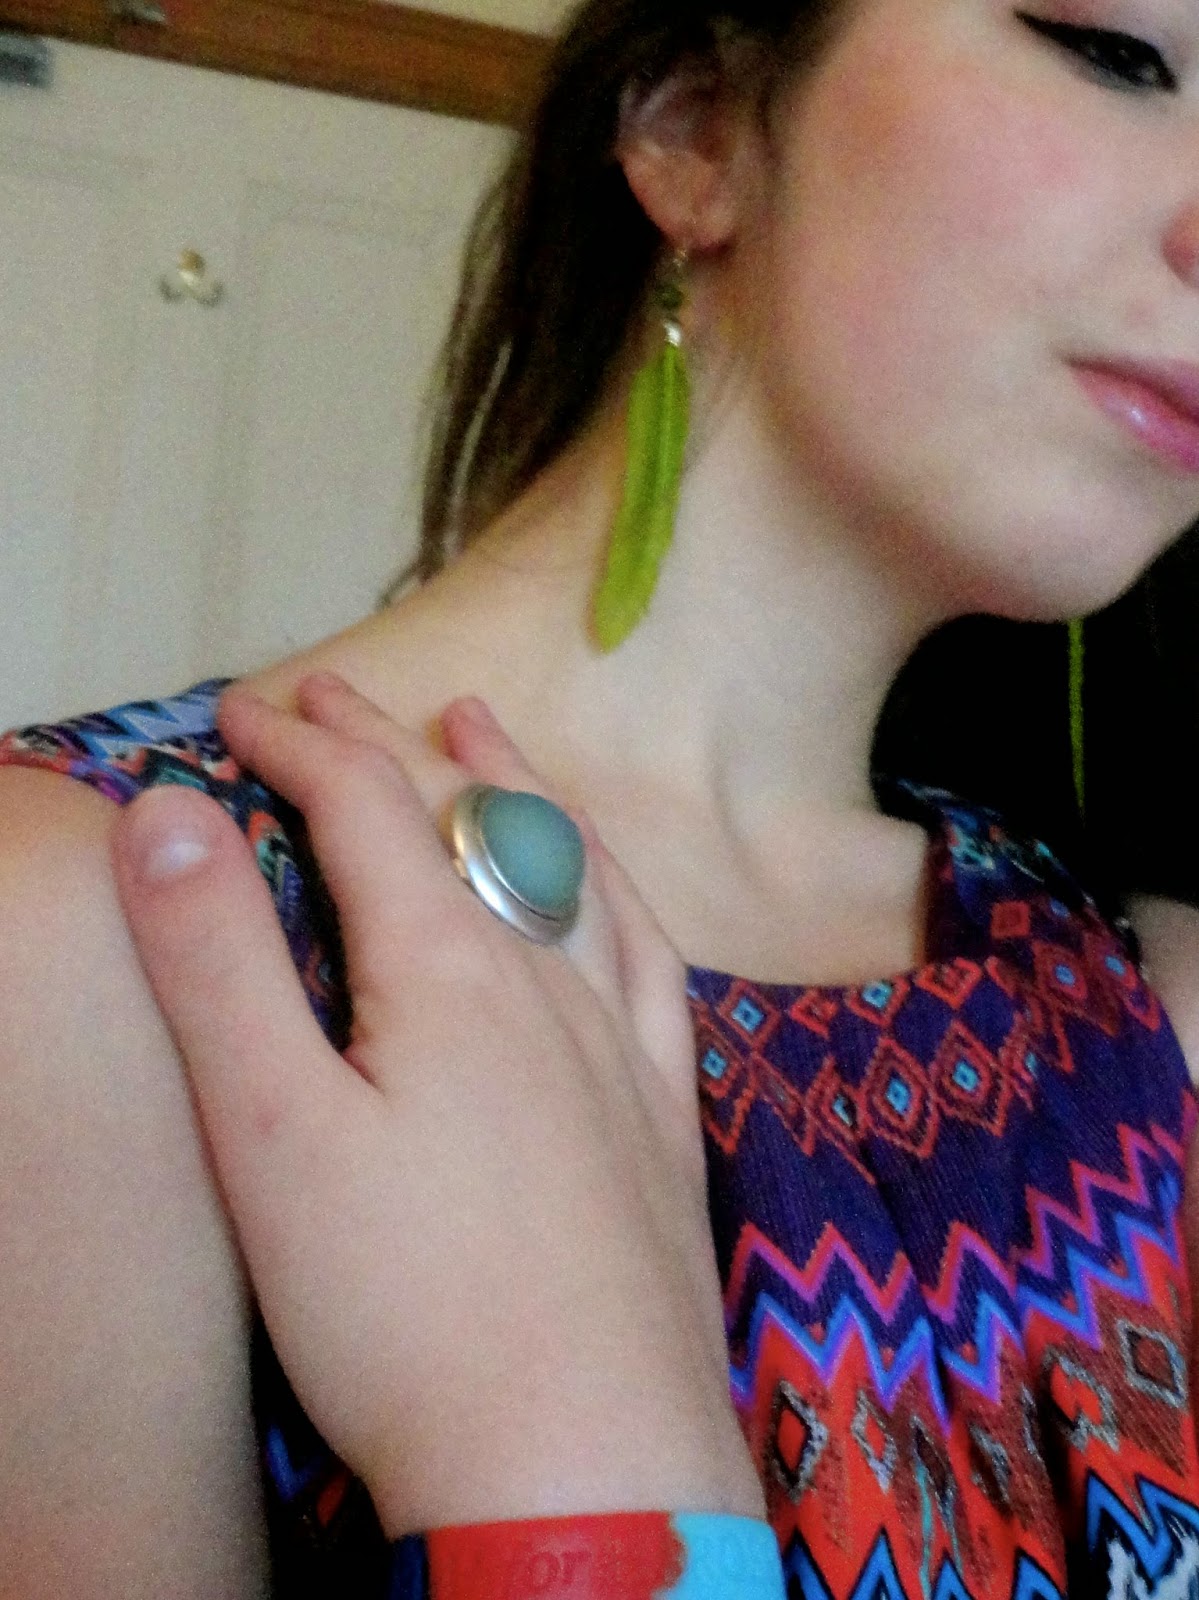 Tropical | outfit jewellery details of green feather earrings and large blue stone ring